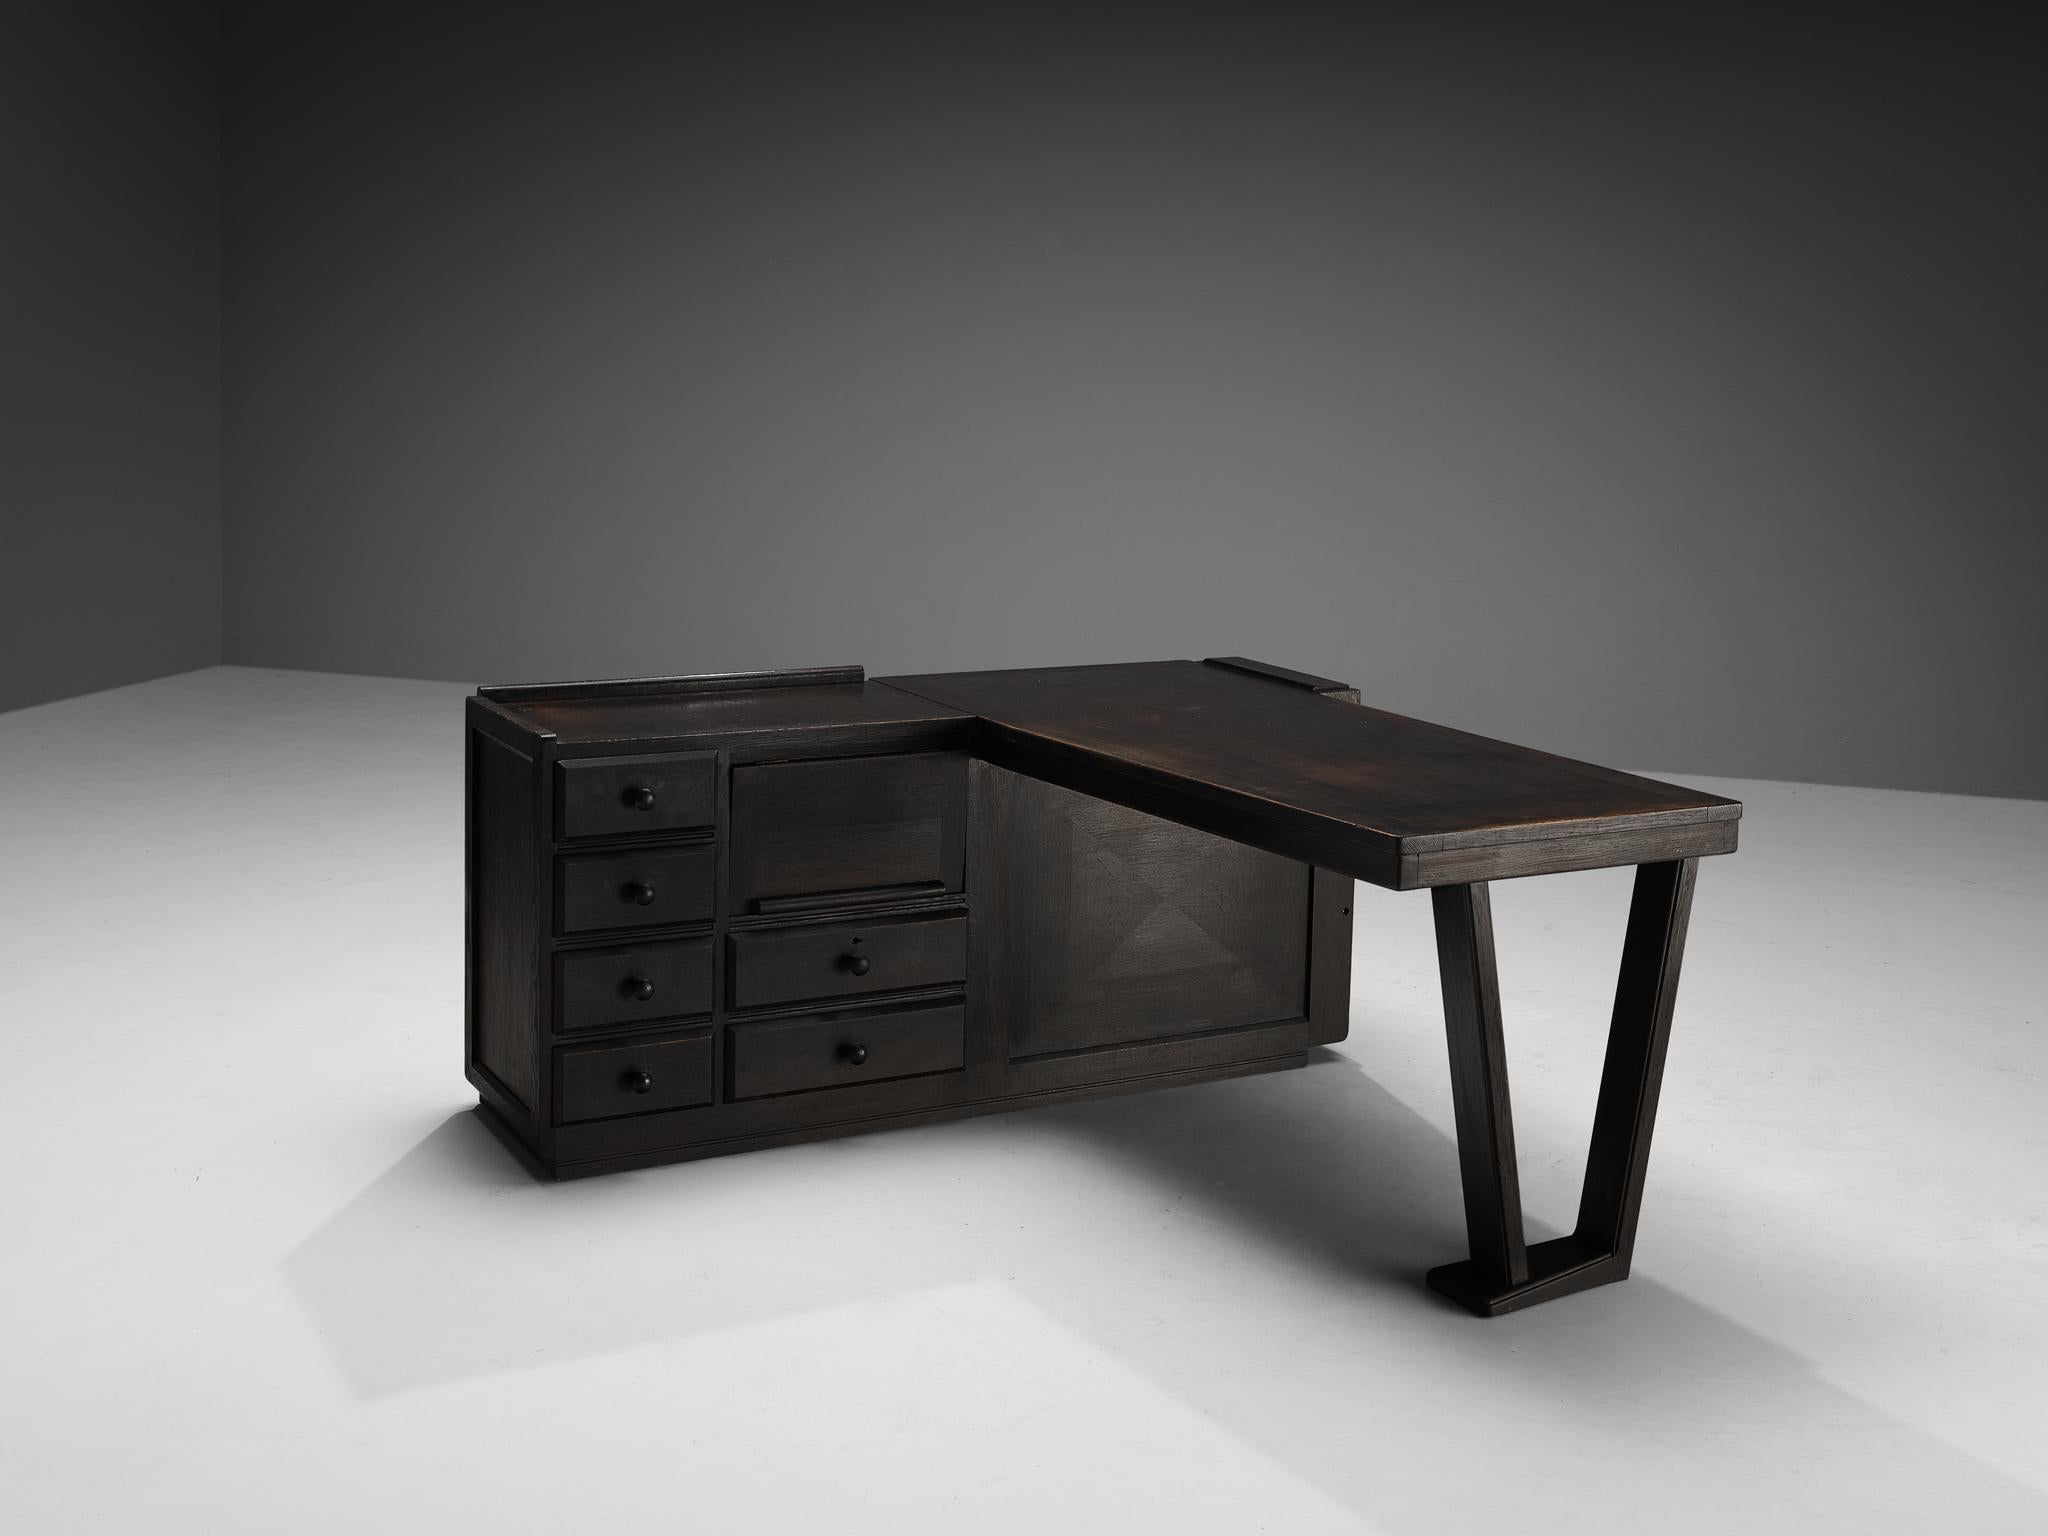 Guillerme et Chambron for Votre Maison, corner desk, stained oak, France, 1960s.

Corner desk by French designer duo Guillerme and Chambron. This executive desk shows the fine craftsmanship that characterizes the work of this designer duo. The desk